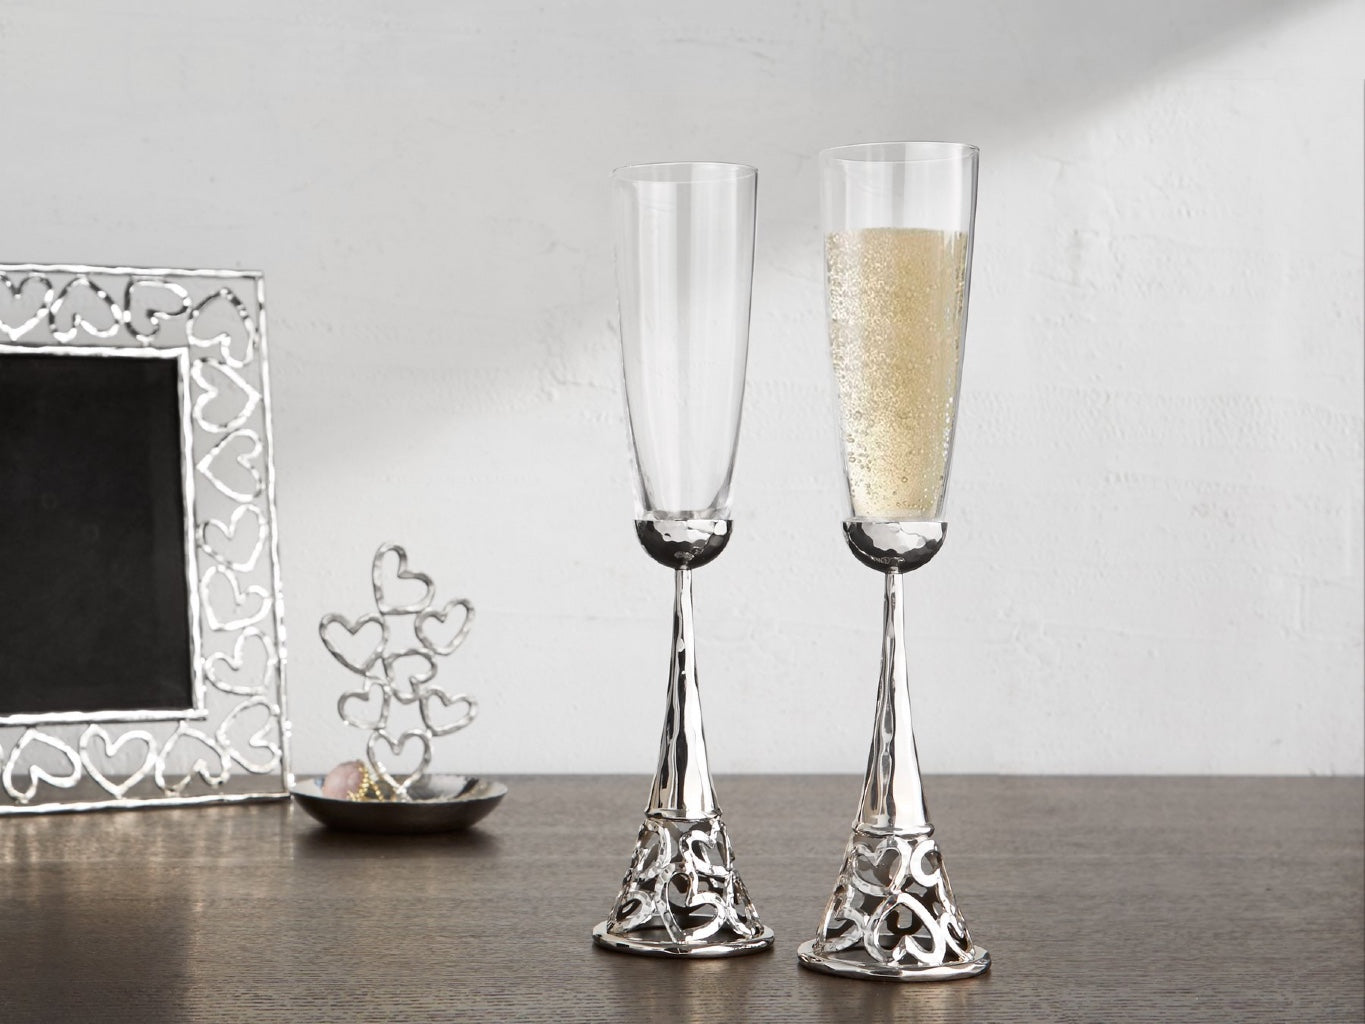 Two toasting flutes with a silver vase, designed with heart shape on the bottom, a picture frame with the same hearts shape and silver finish in the background, and a small sculpture with stacking little hearts.